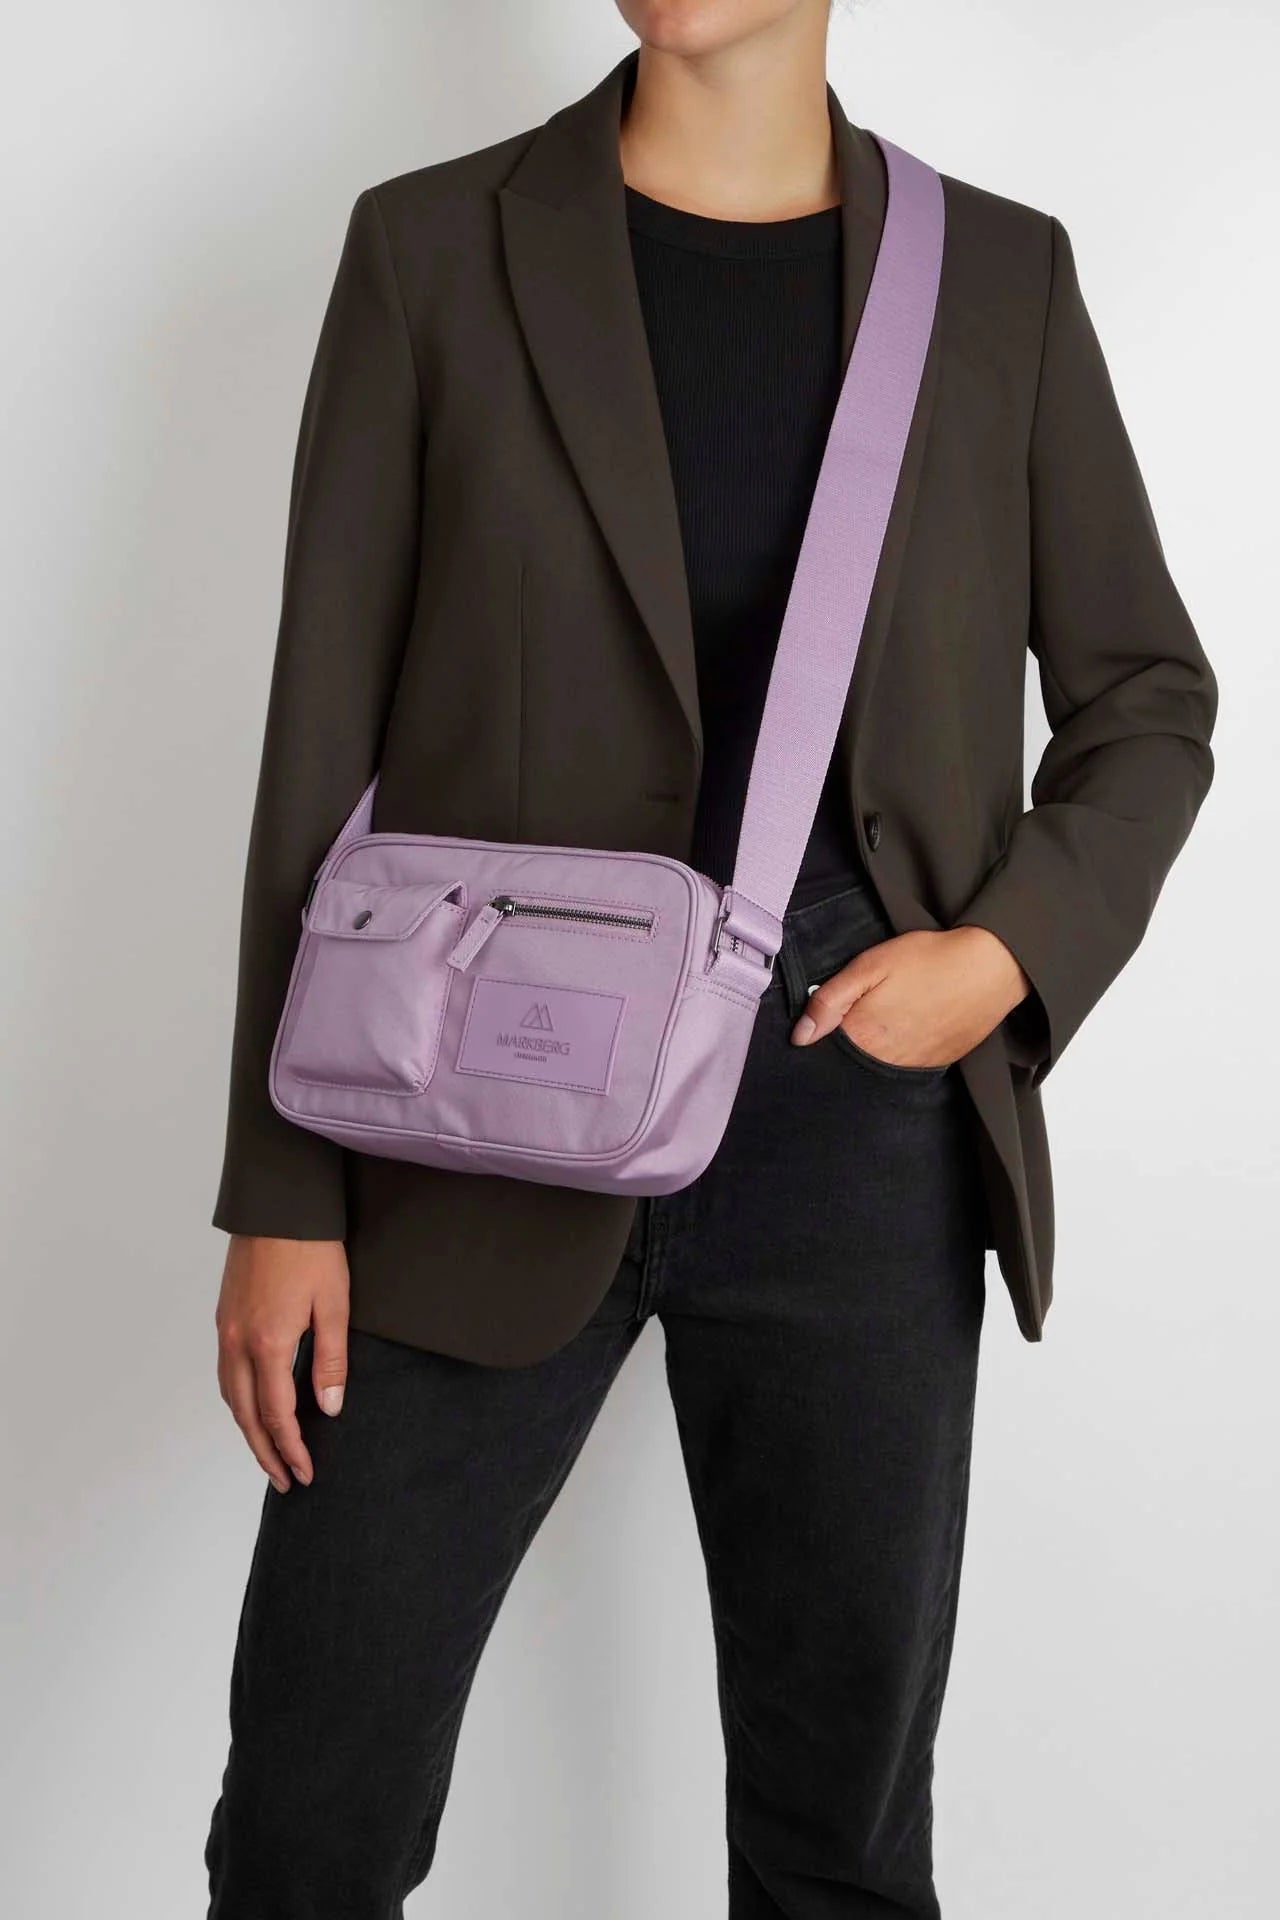 A woman standing with a Markberg Darla Crossbody Bag in Polar Purple across a dark blazer and jeans outfit.